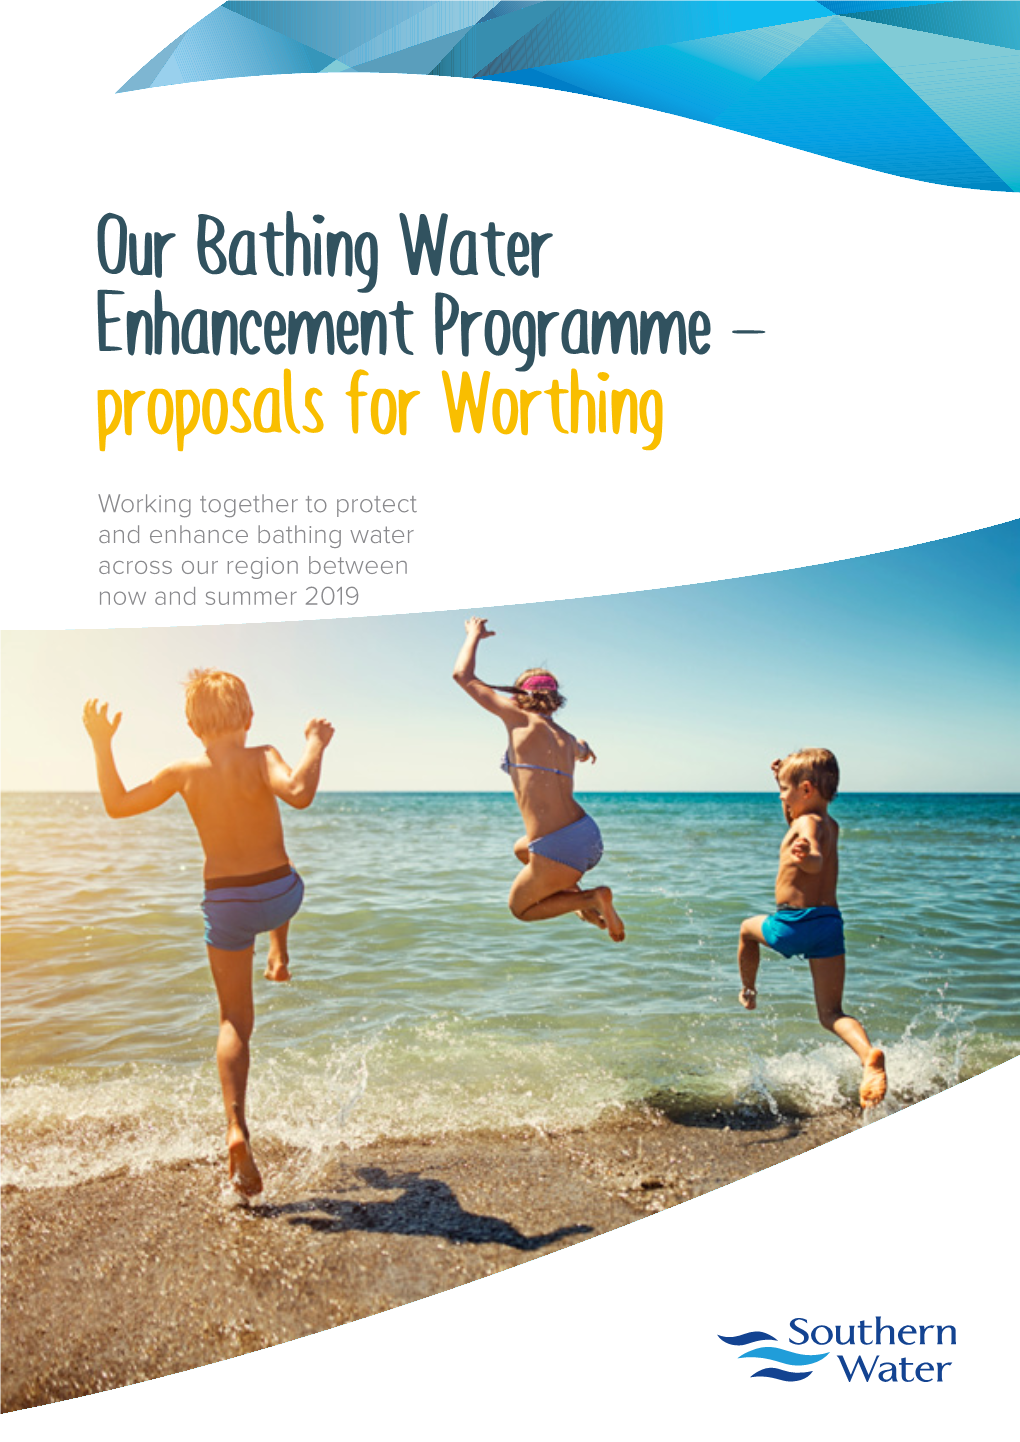 Our Bathing Water Enhancement Programme - Proposals for Worthing